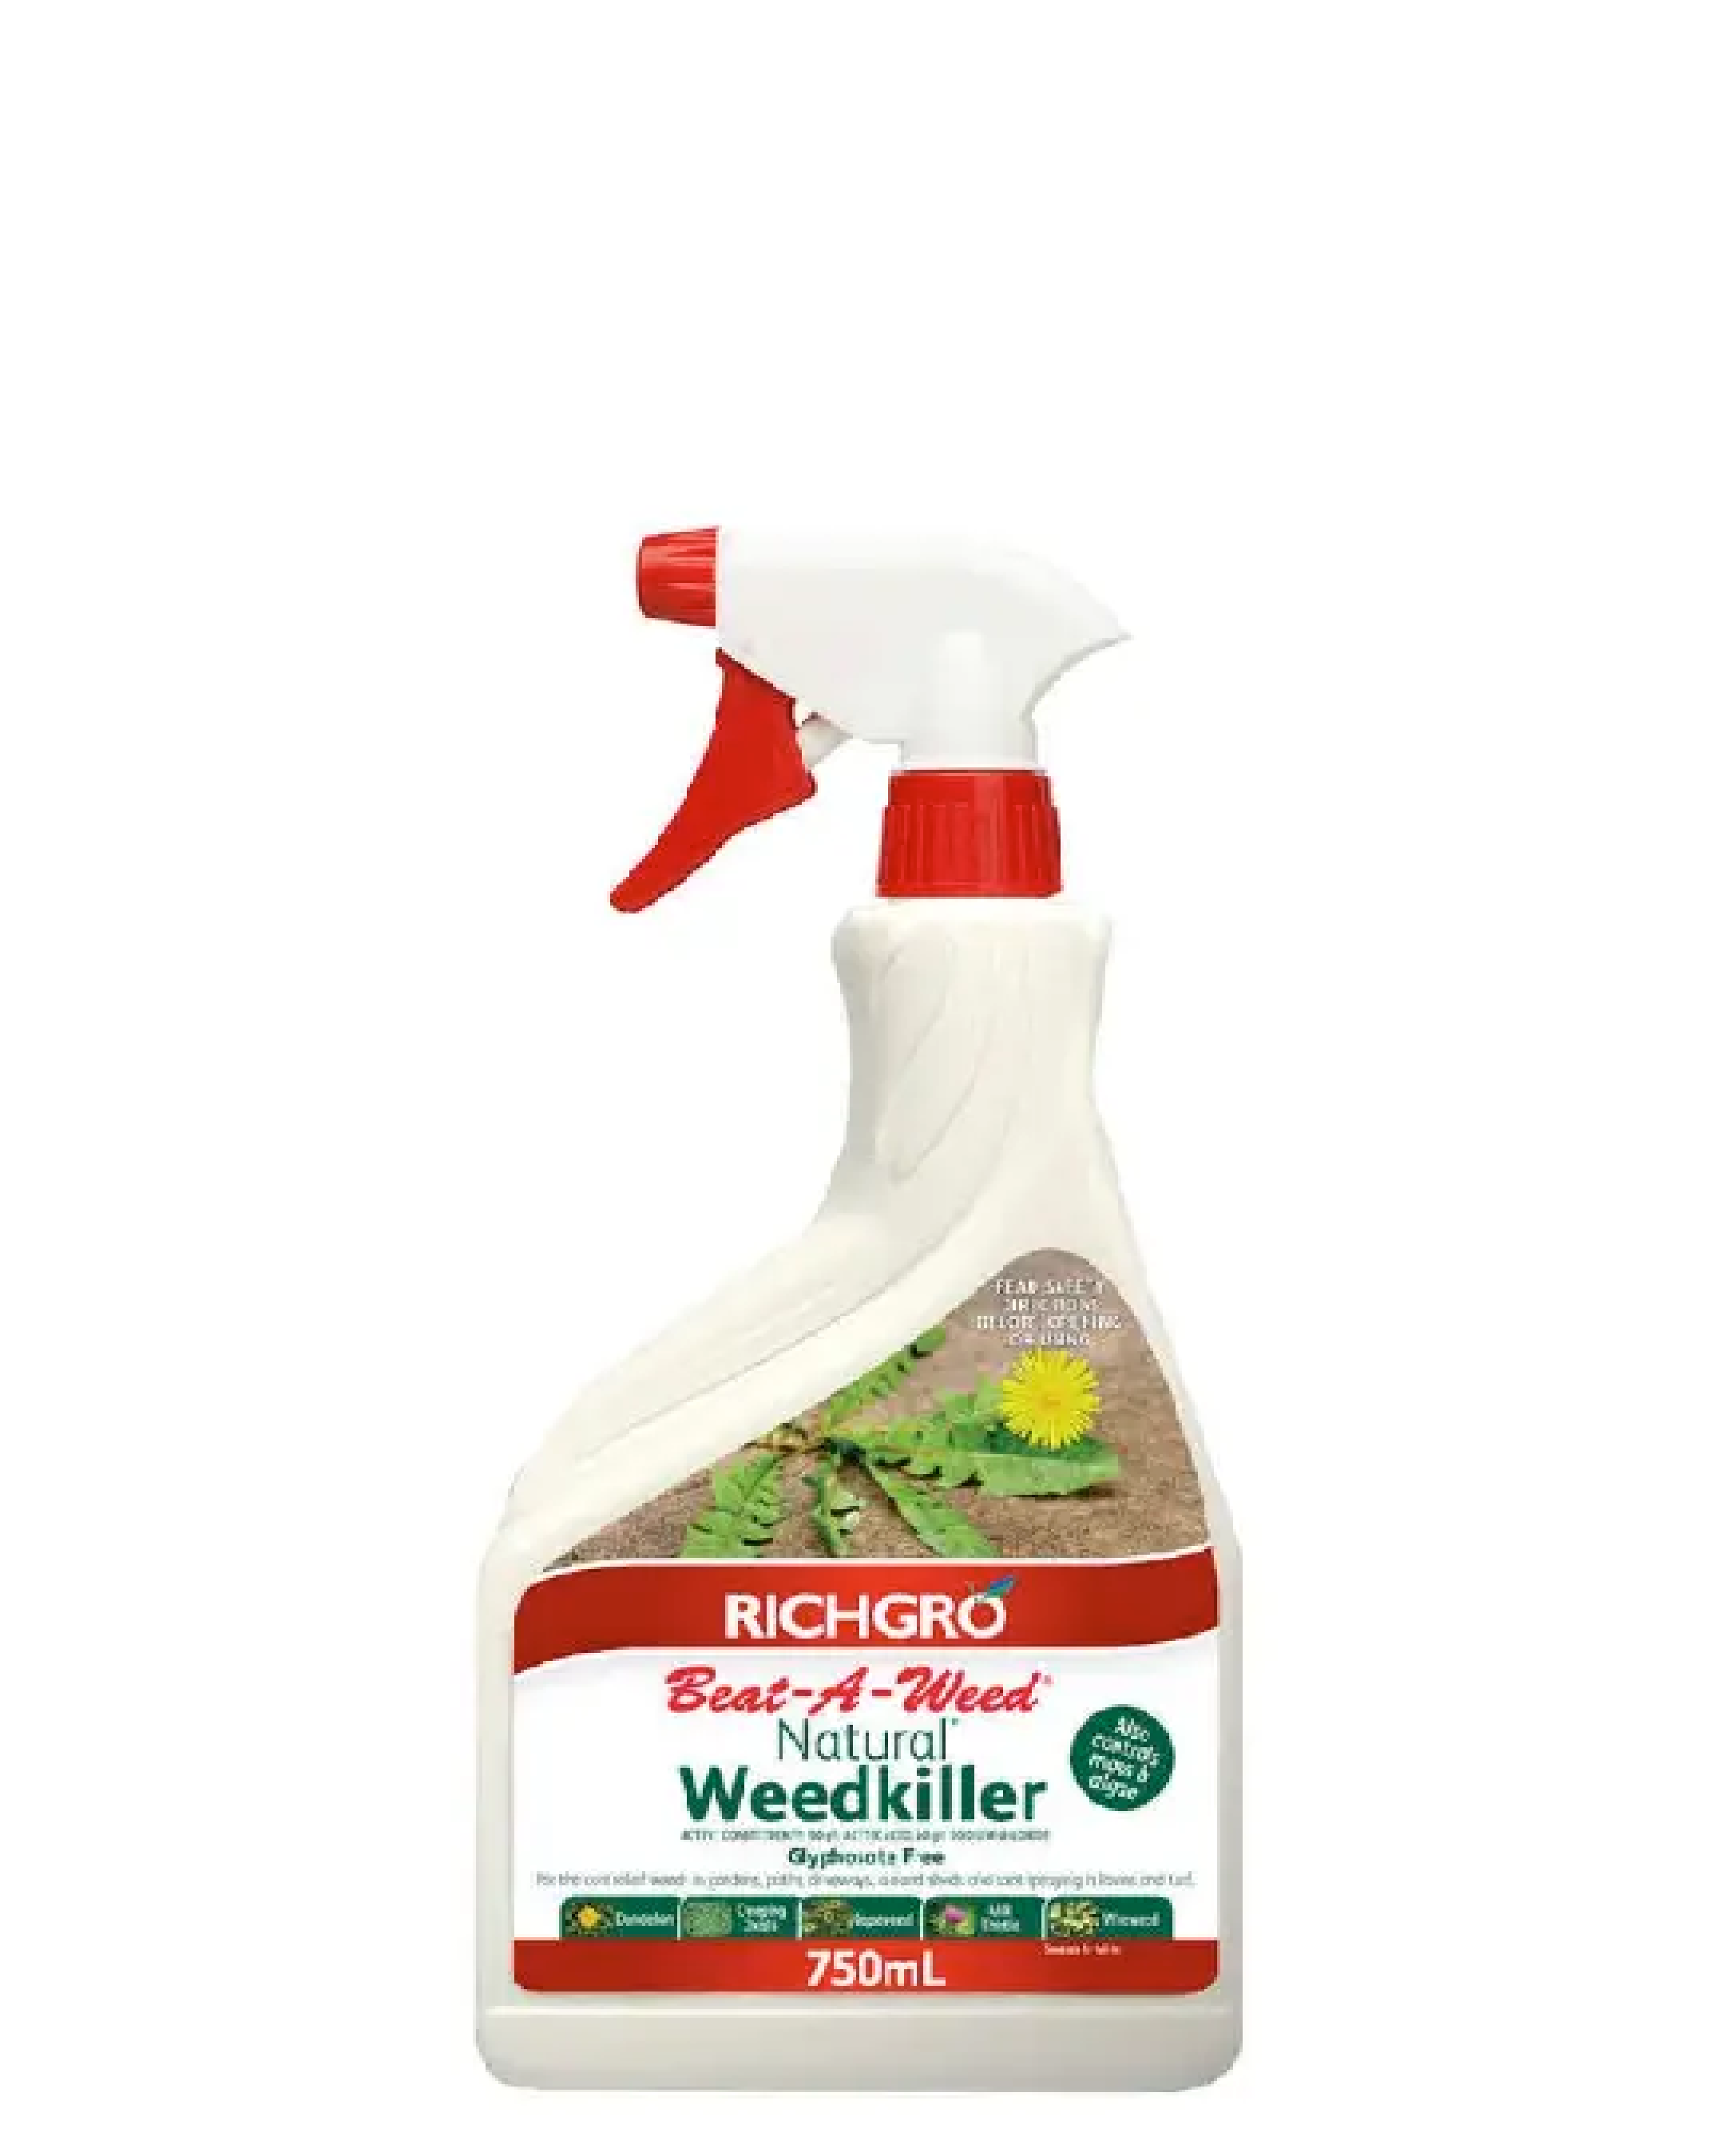 Beat A Weed Natural Weedkiller - Ready to Use